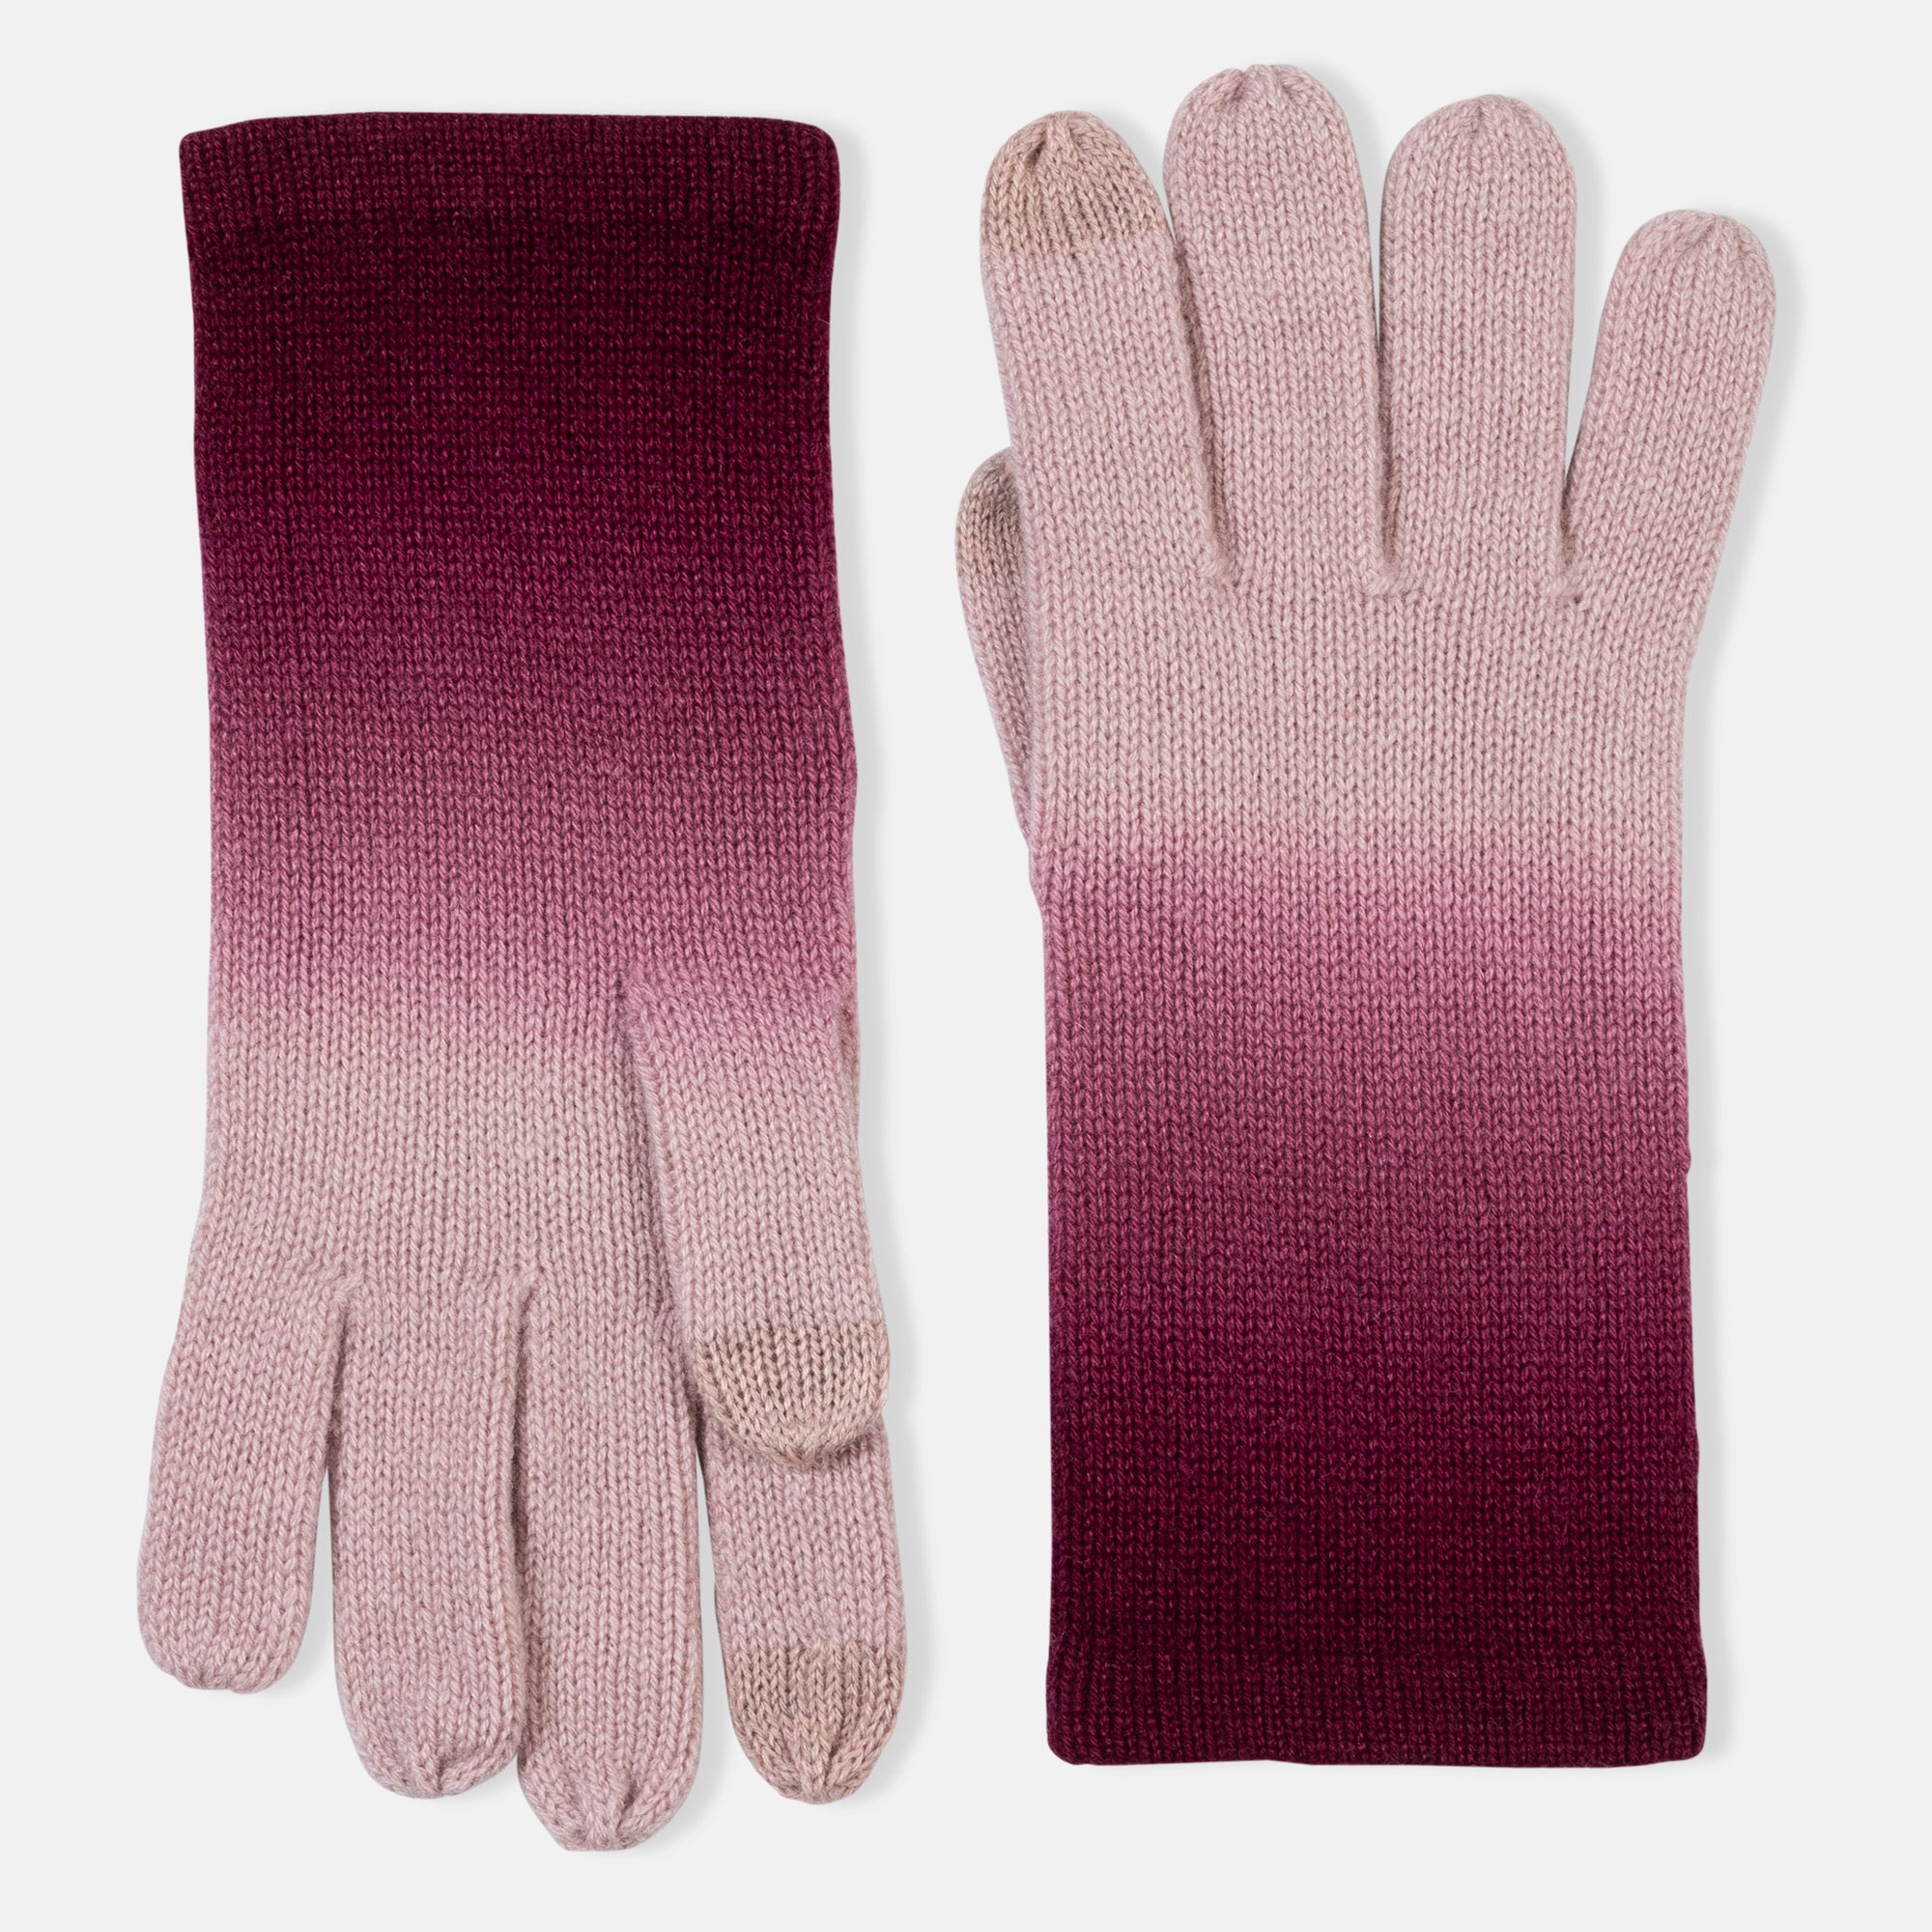 Picture of knitted cashmere gloves with tough tech at the thumb and pointer, in an ombre design of pink and burgundy.